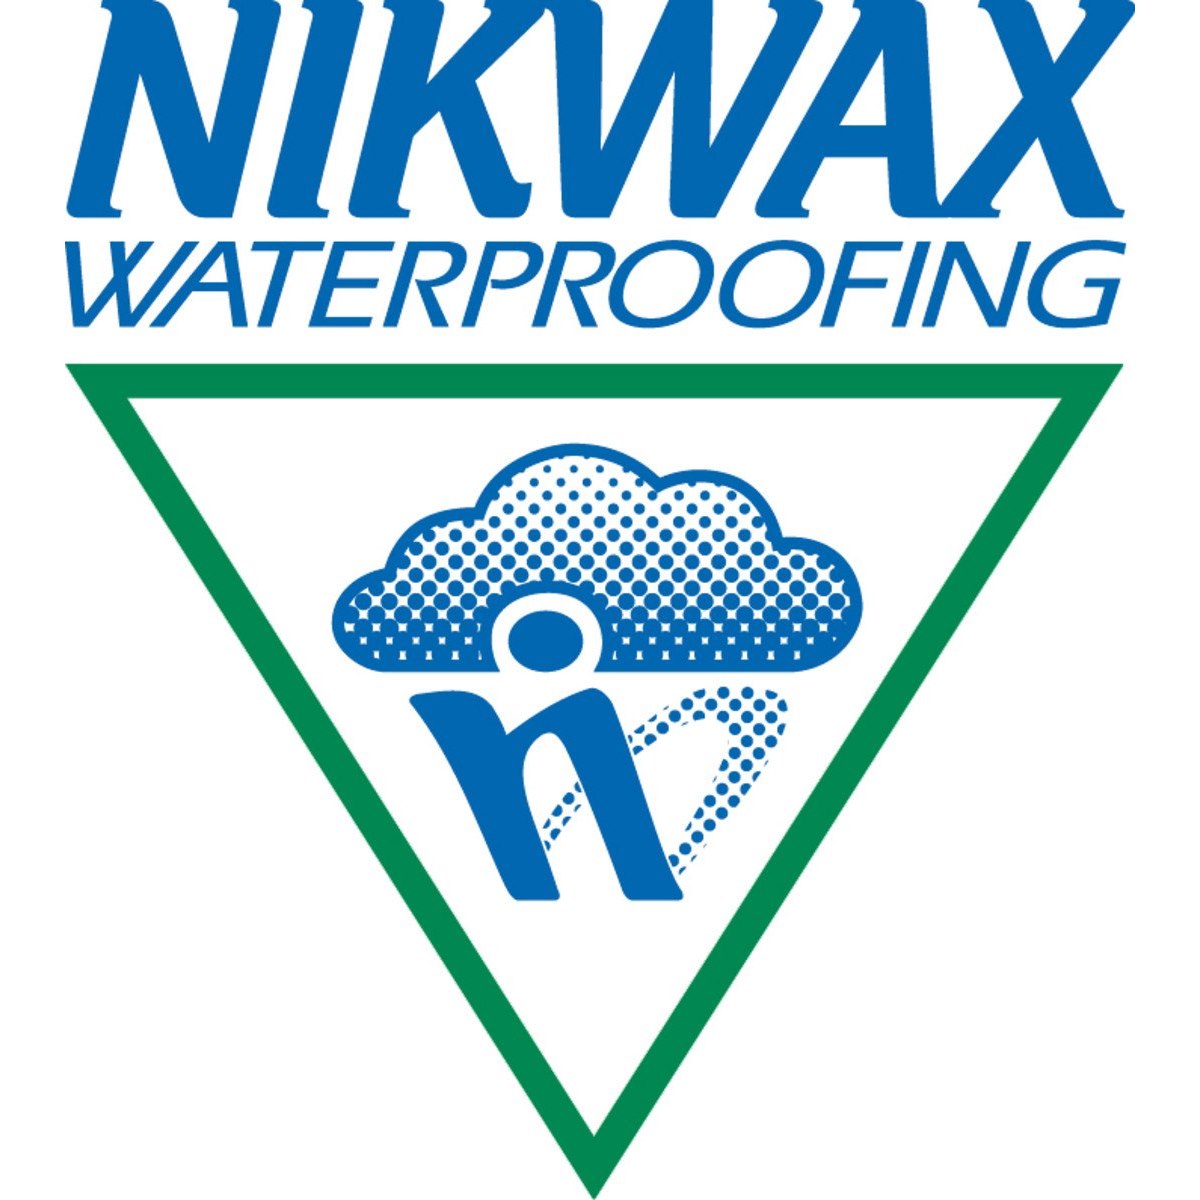 Where to Buy Nikwax Products